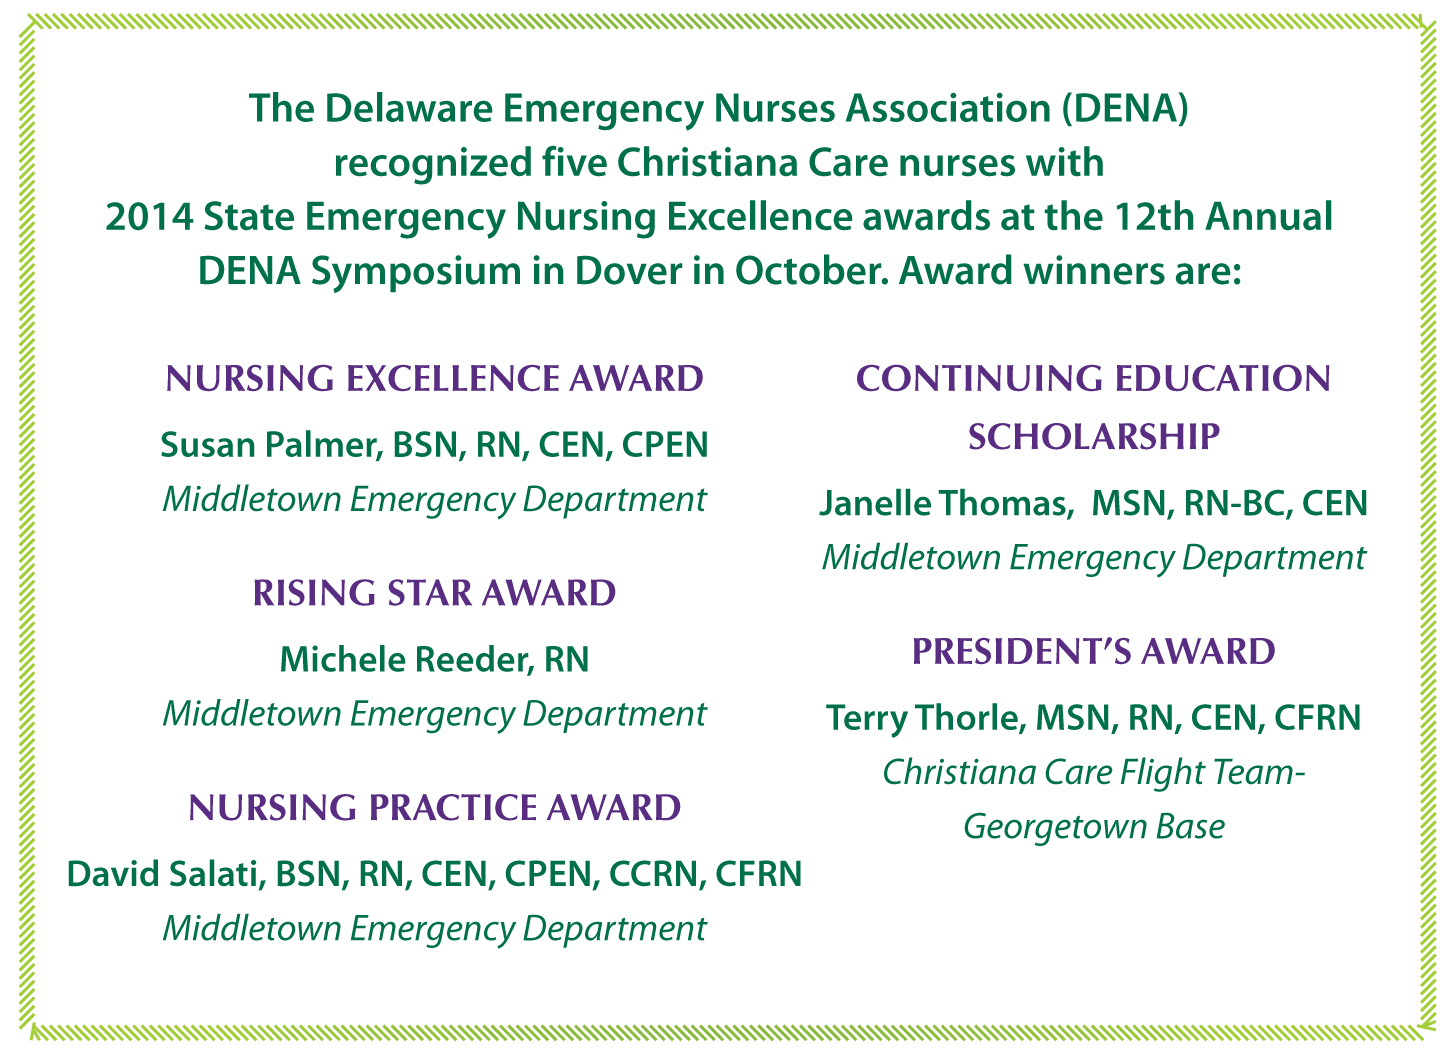 The Delaware Emergency Nurses Association (DENA) recognized five Christiana Care nurses with 2014 State Emergency Nursing Excellence awards at the 12th Annual DENA Symposium in Dover in October.